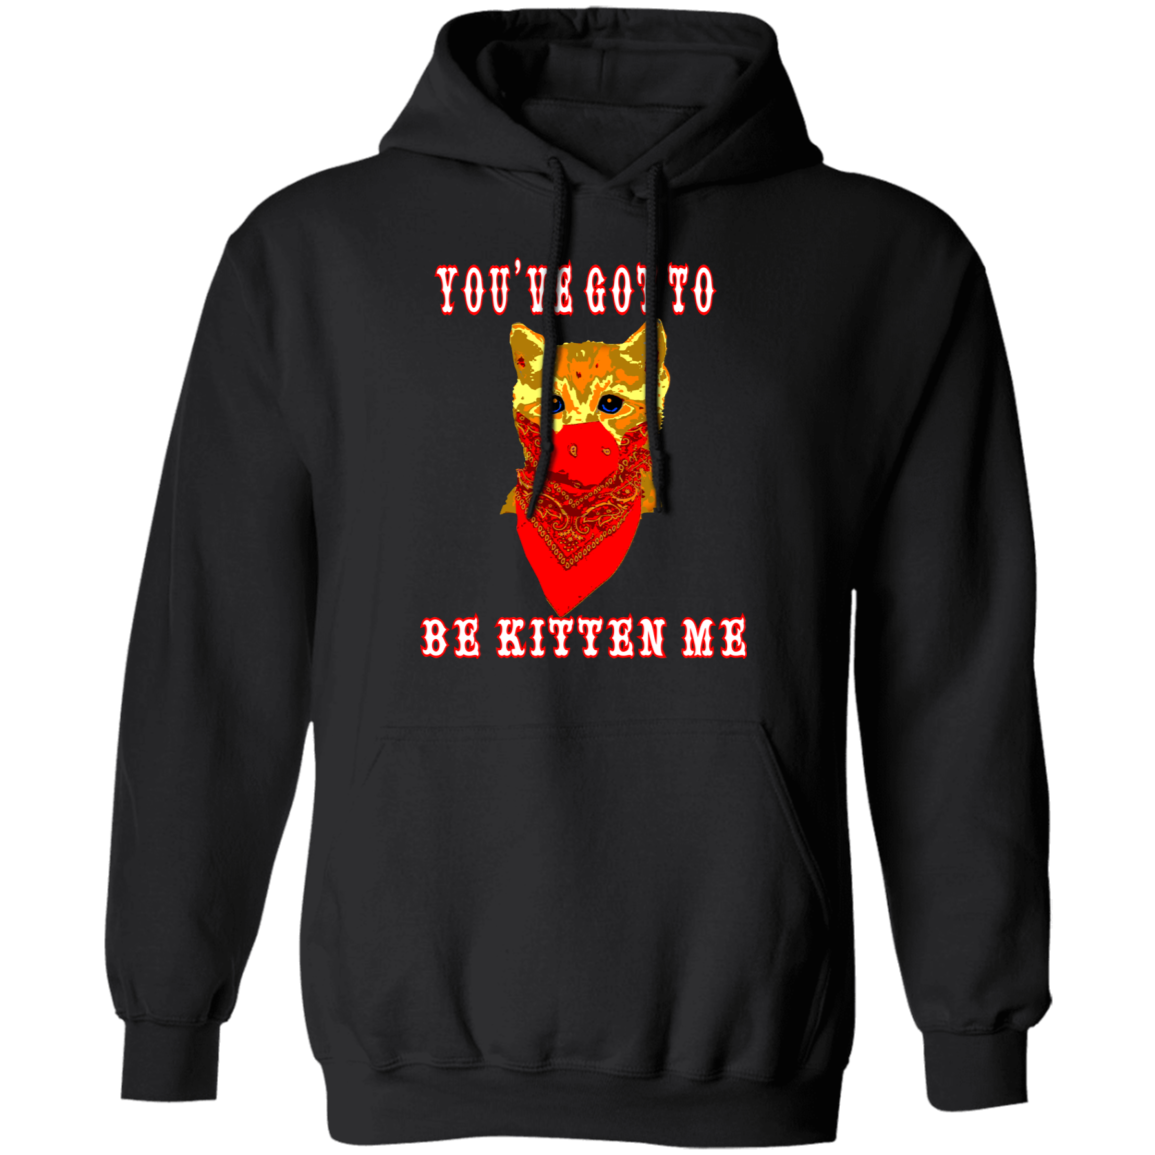 ArtichokeUSA Custom Design. You've Got To Be Kitten Me?! 2020, Not What We Expected. Pullover Hoodie